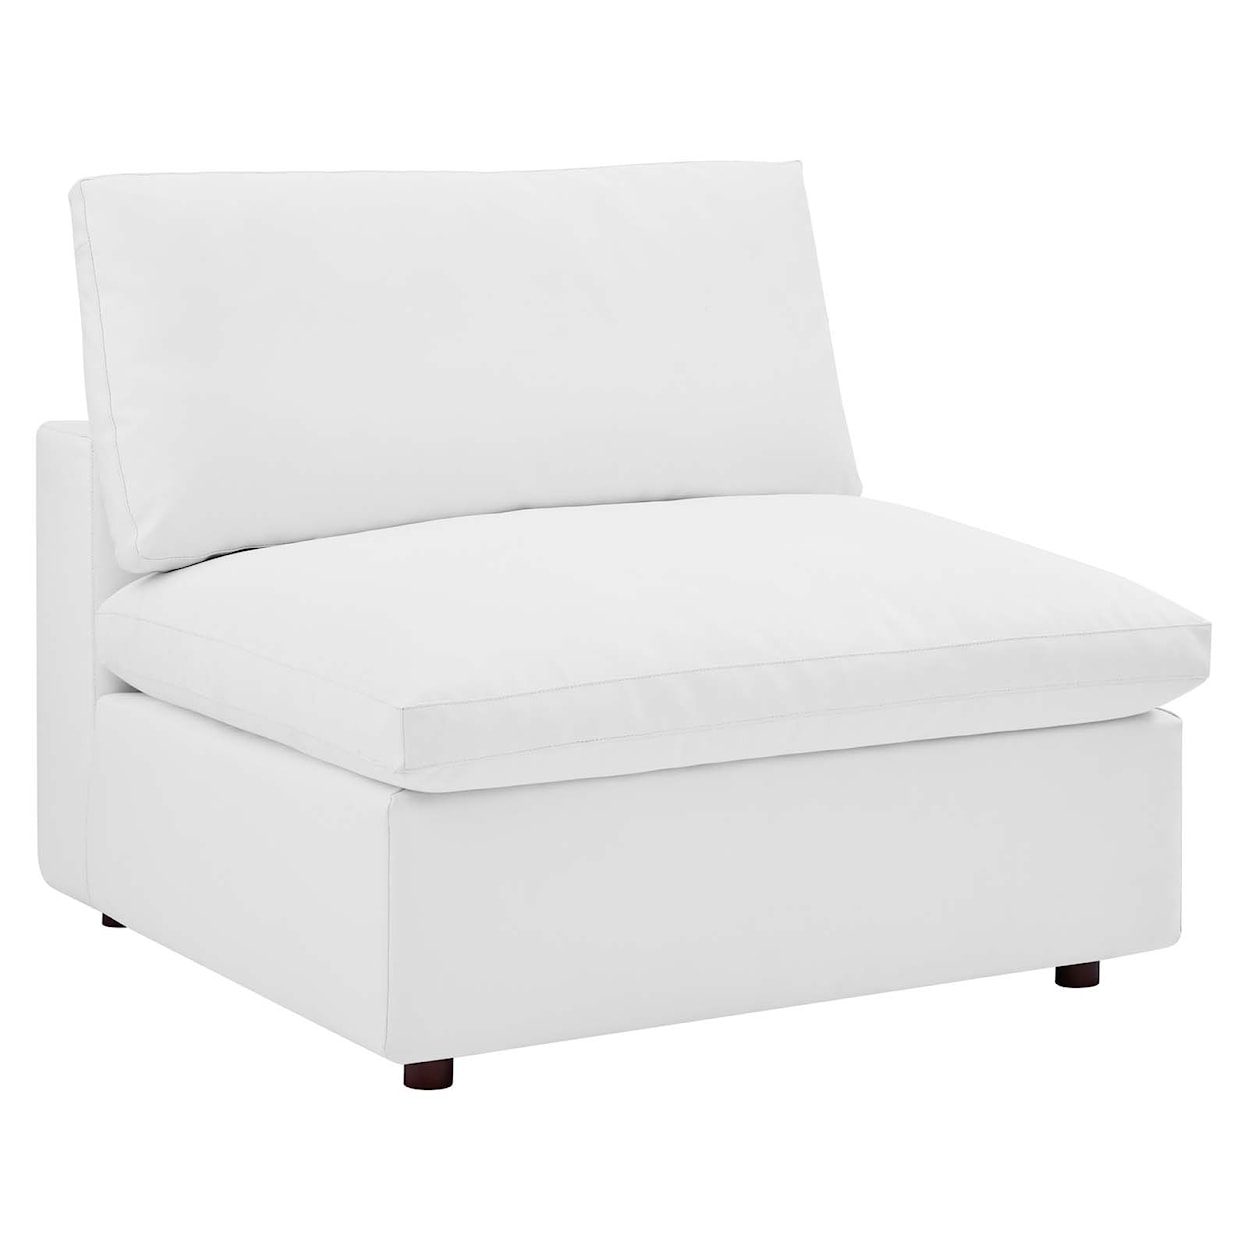 Modway Commix Armless Chair